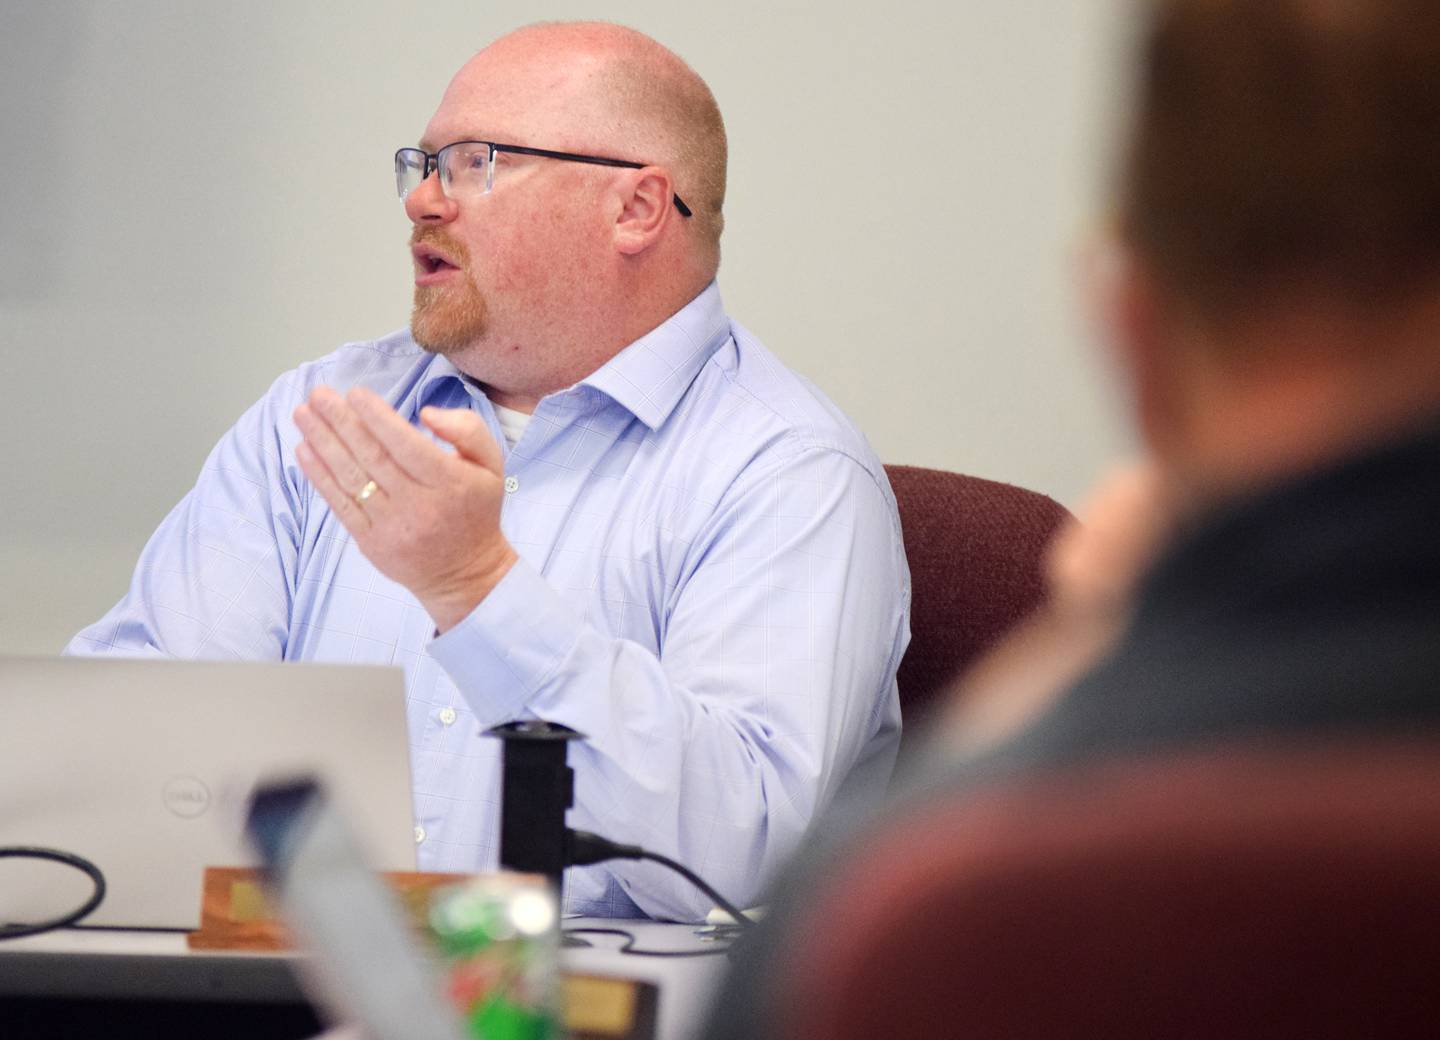 Tim Bloom, director of business services at Newton Community School District, discusses master planning and facility assessments during a work session Aug. 8 at the E.J.H. Beard Administration Center.